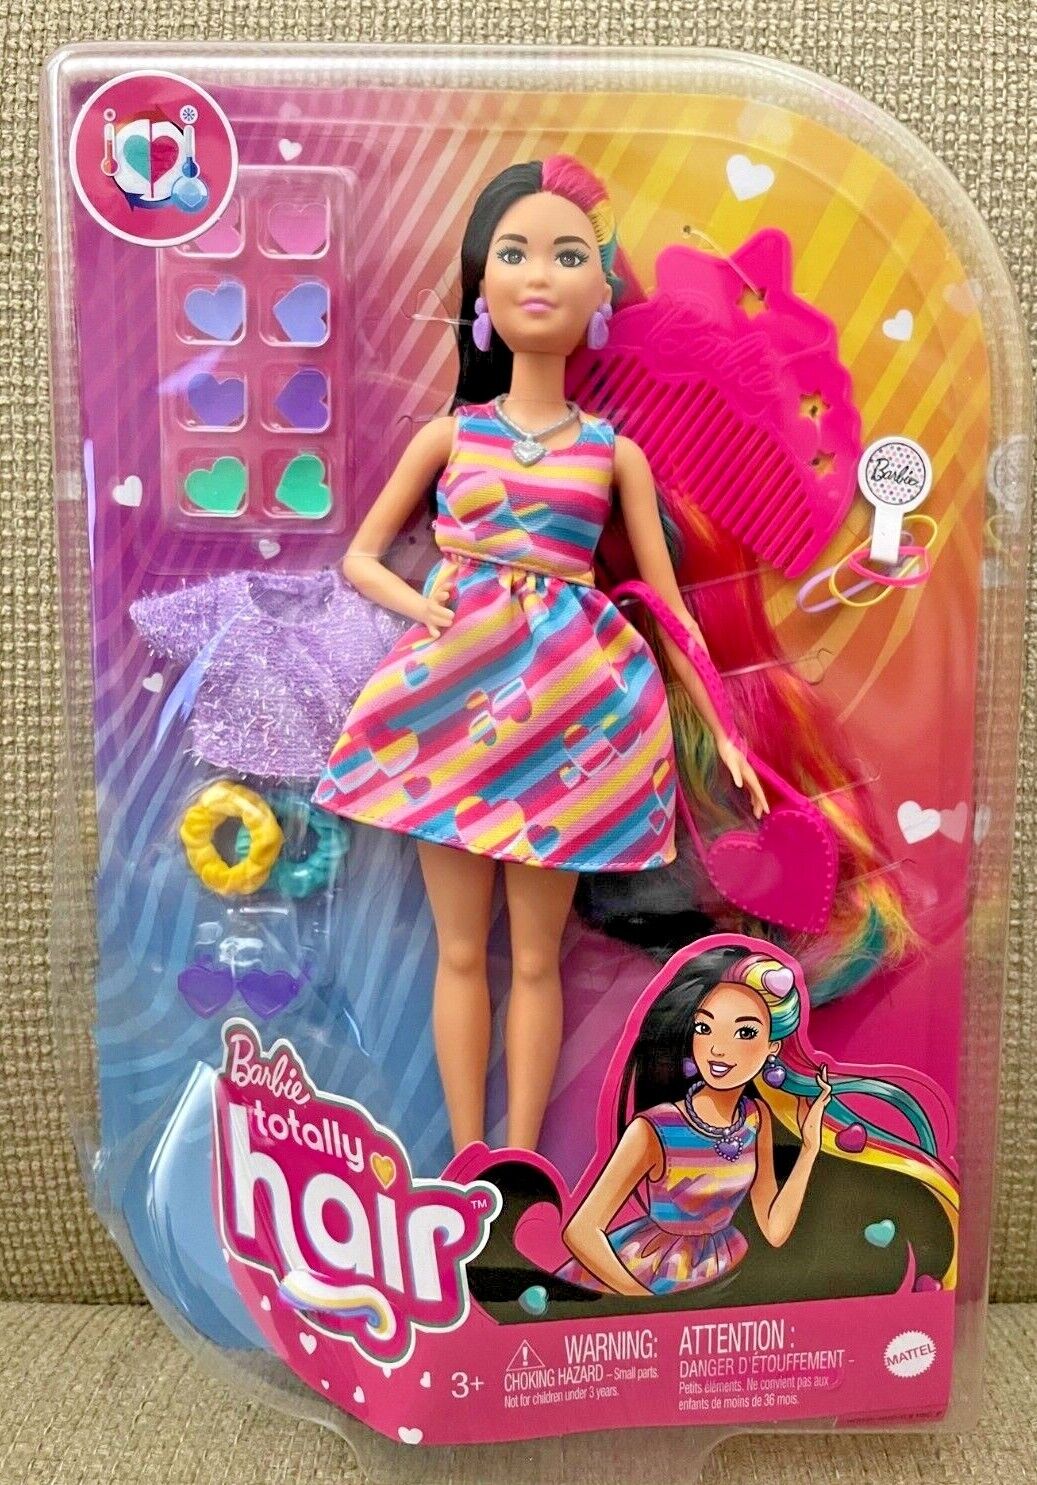 BARBIE - TOTALLY HAIR - BLACK HAIRED DOLL